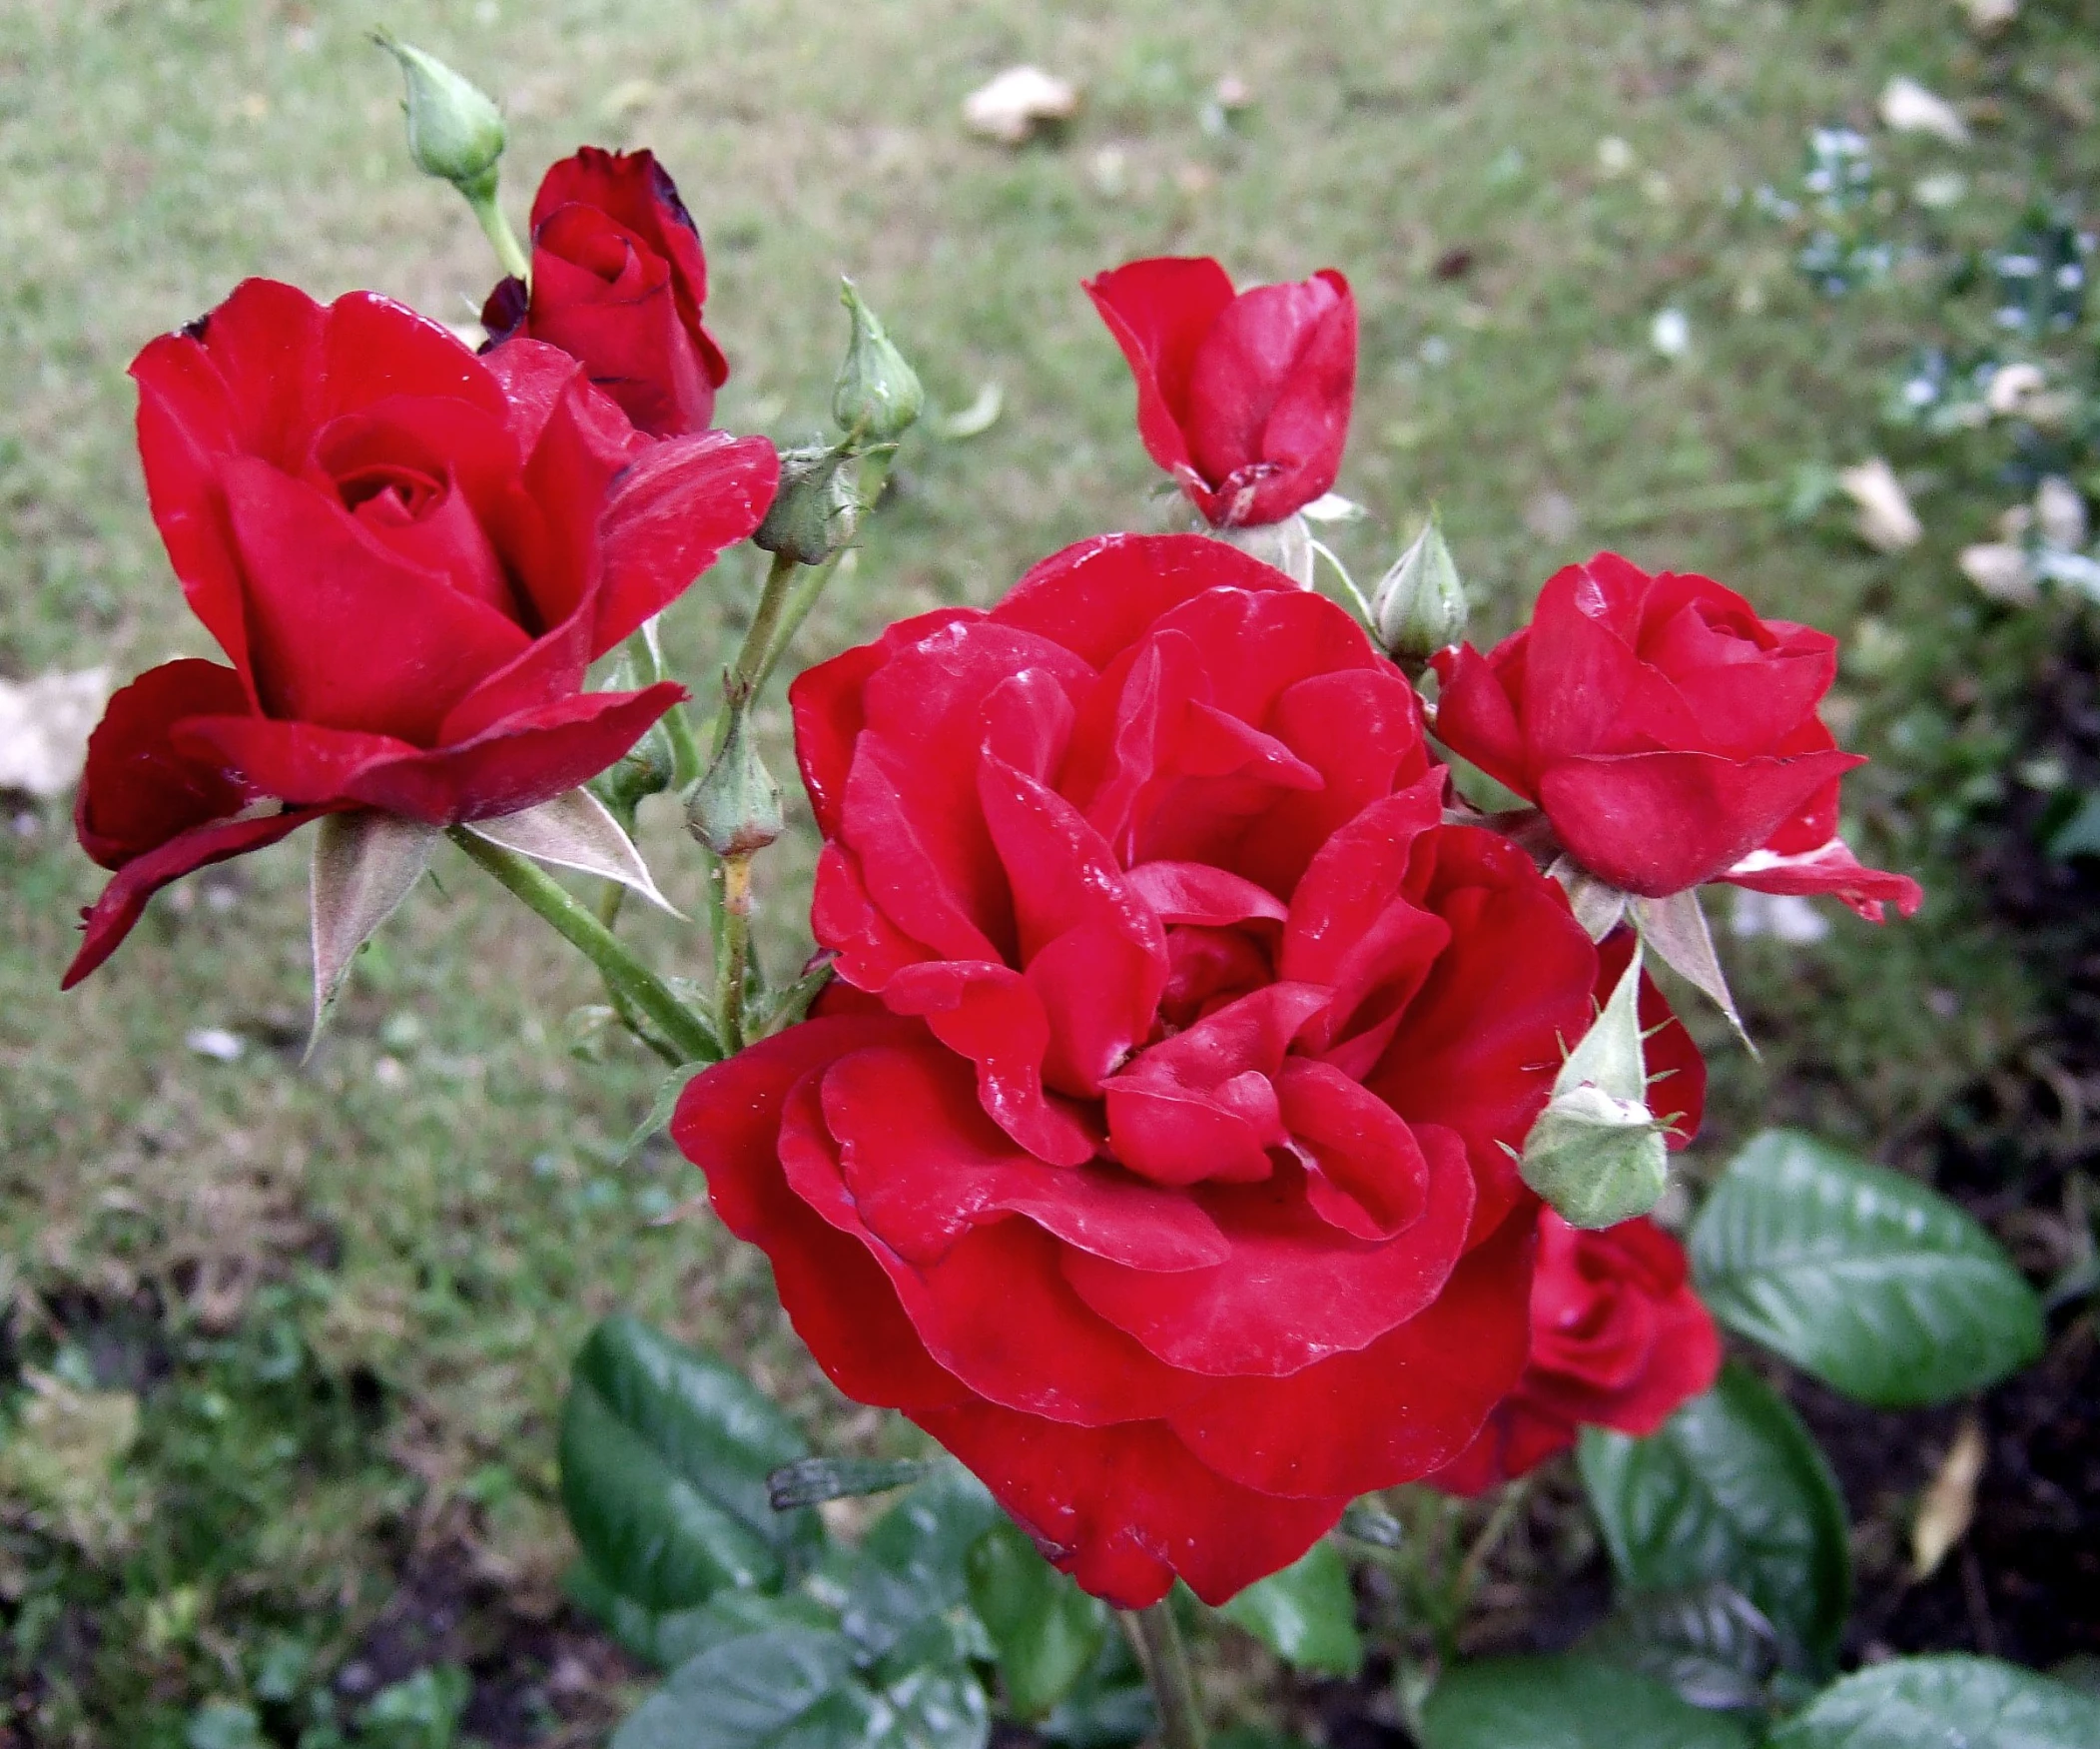 three red roses with some green leaves